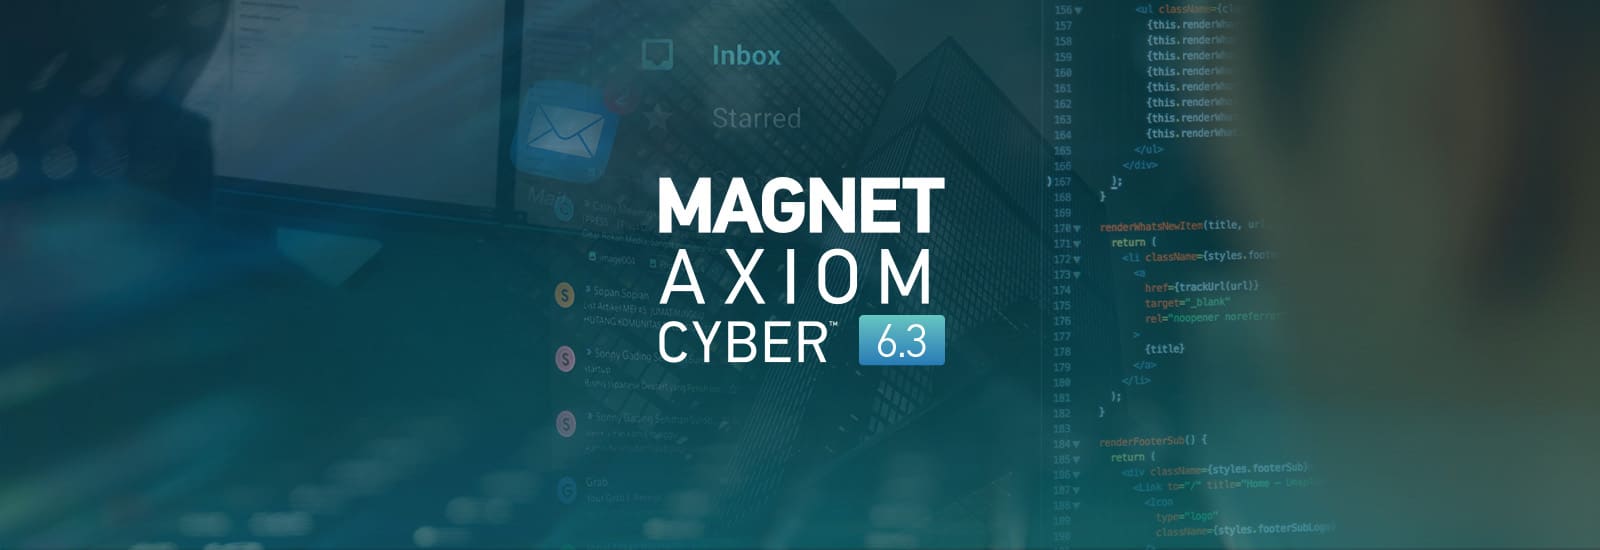 A decorative header for the Magnet AXIOM Cyber 6.3 release